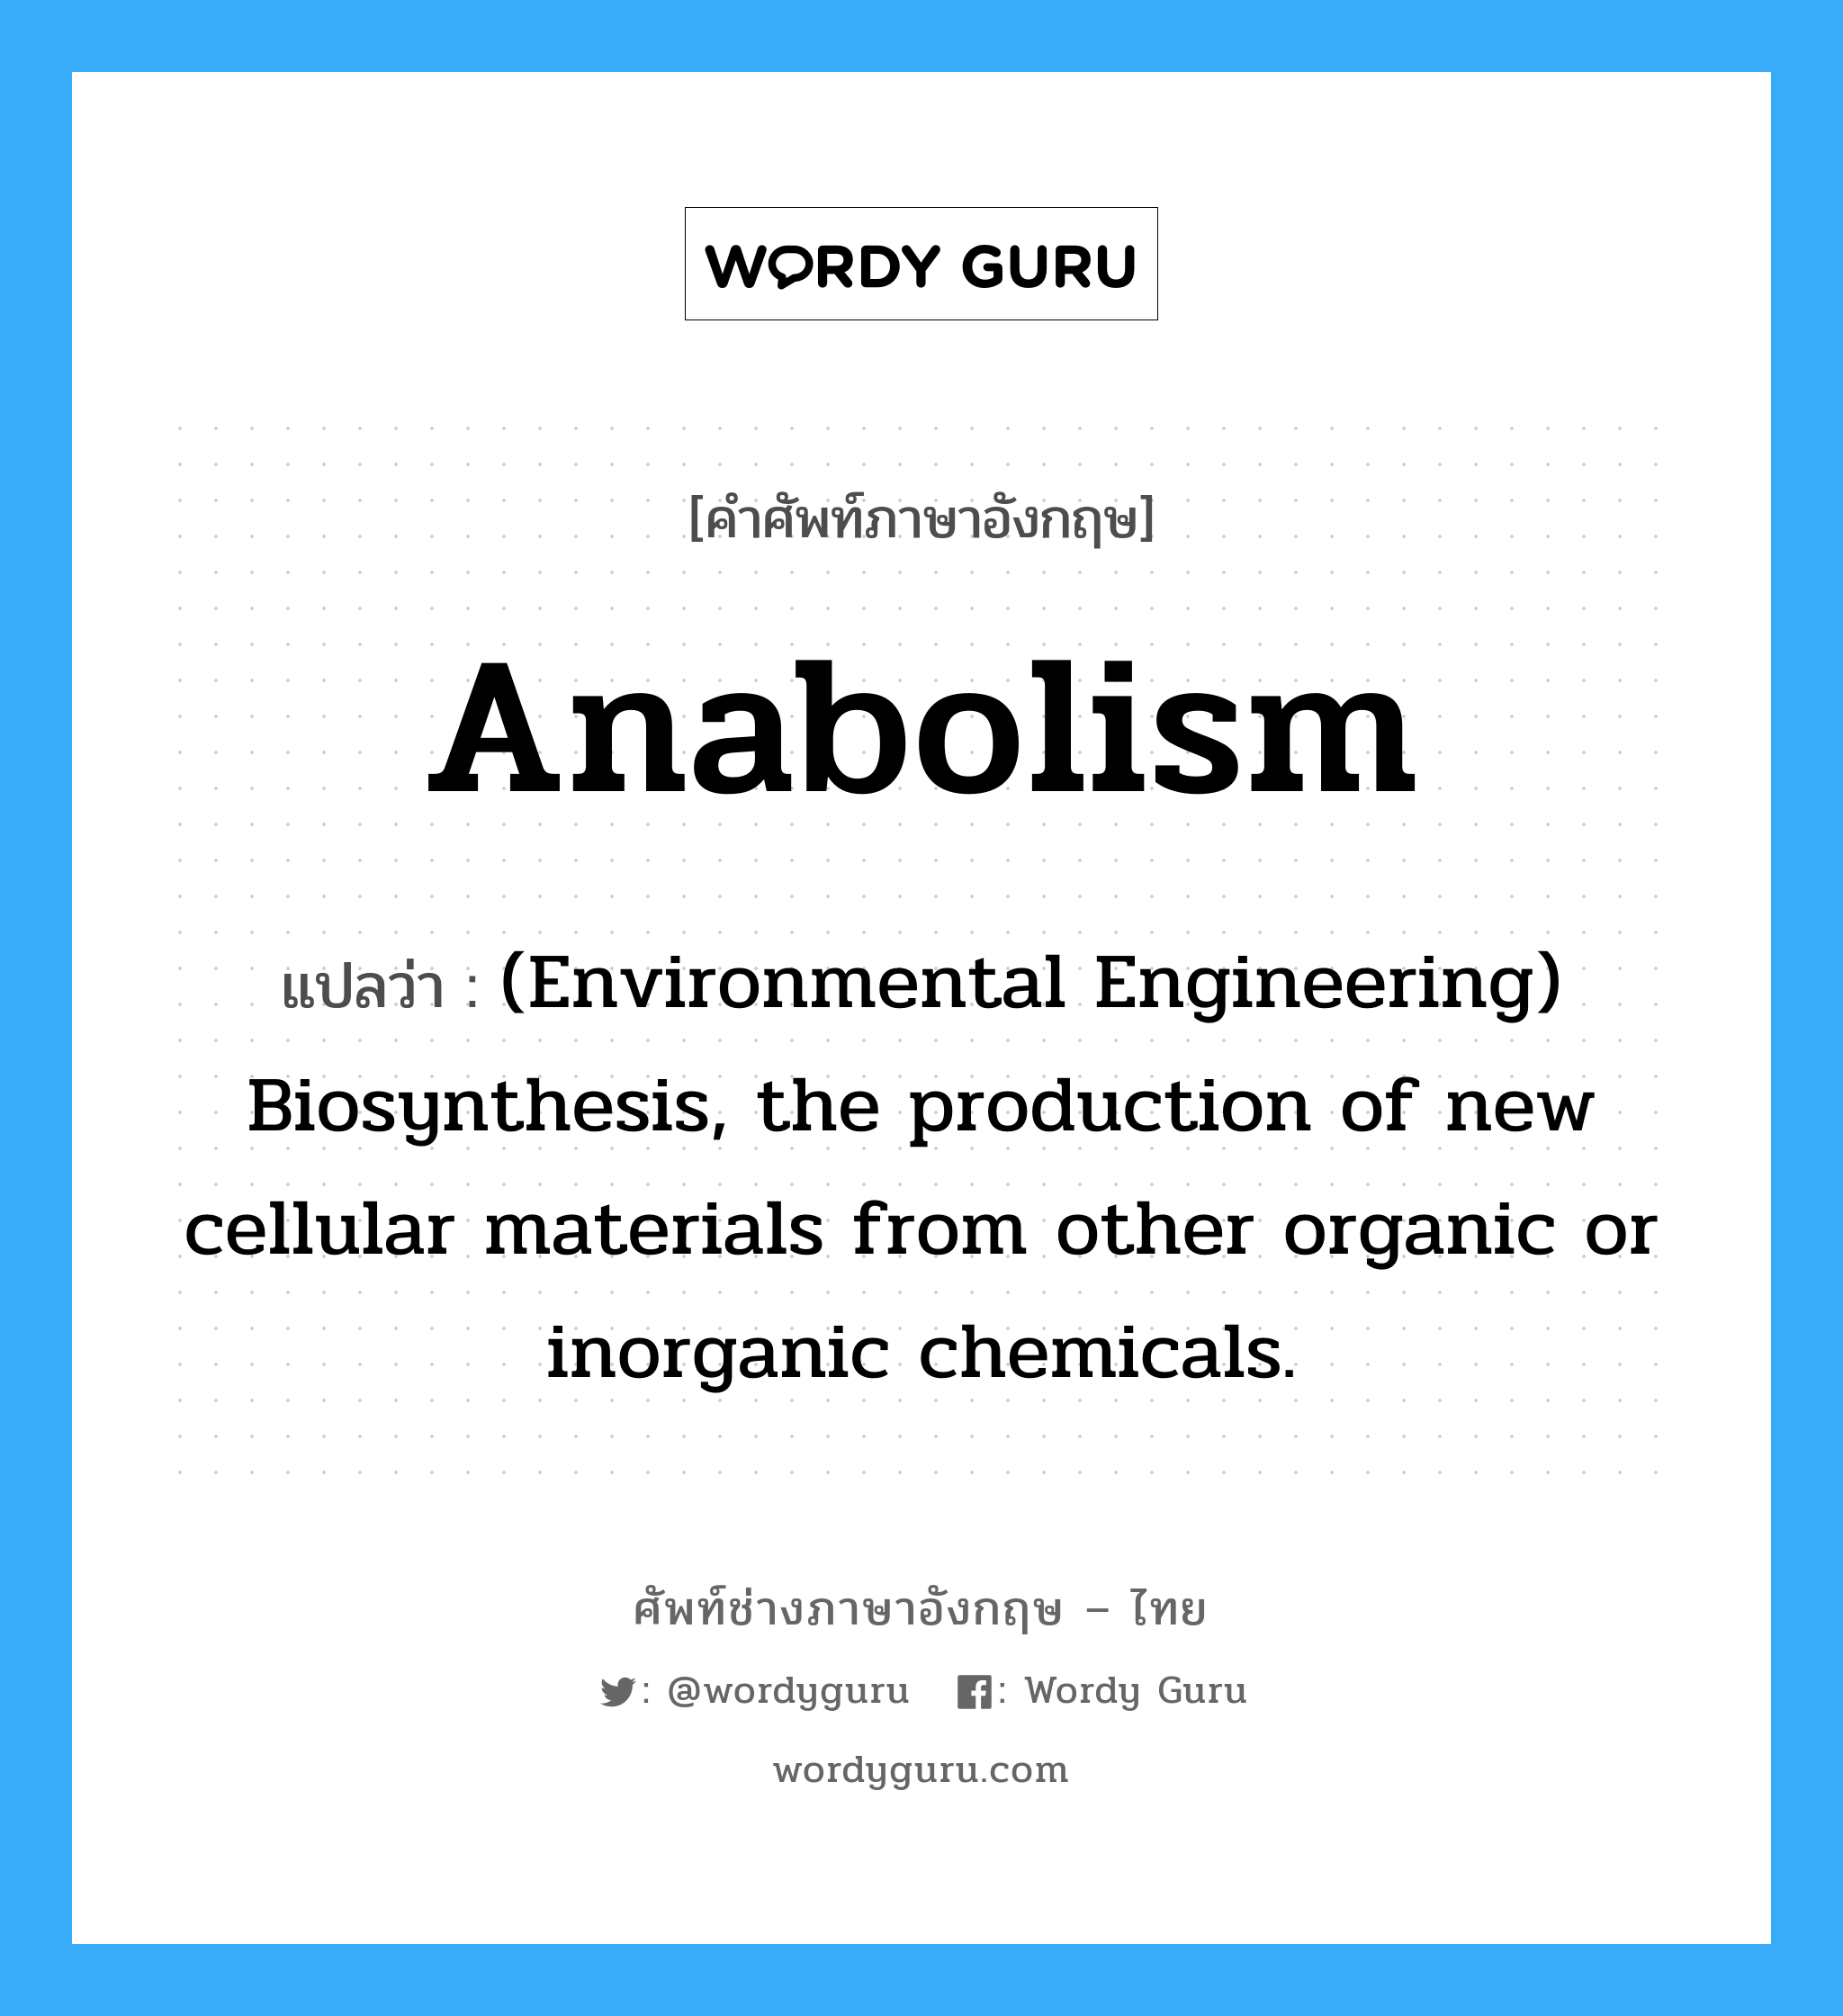 Anabolism แปลว่า?, คำศัพท์ช่างภาษาอังกฤษ - ไทย Anabolism คำศัพท์ภาษาอังกฤษ Anabolism แปลว่า (Environmental Engineering) Biosynthesis, the production of new cellular materials from other organic or inorganic chemicals.